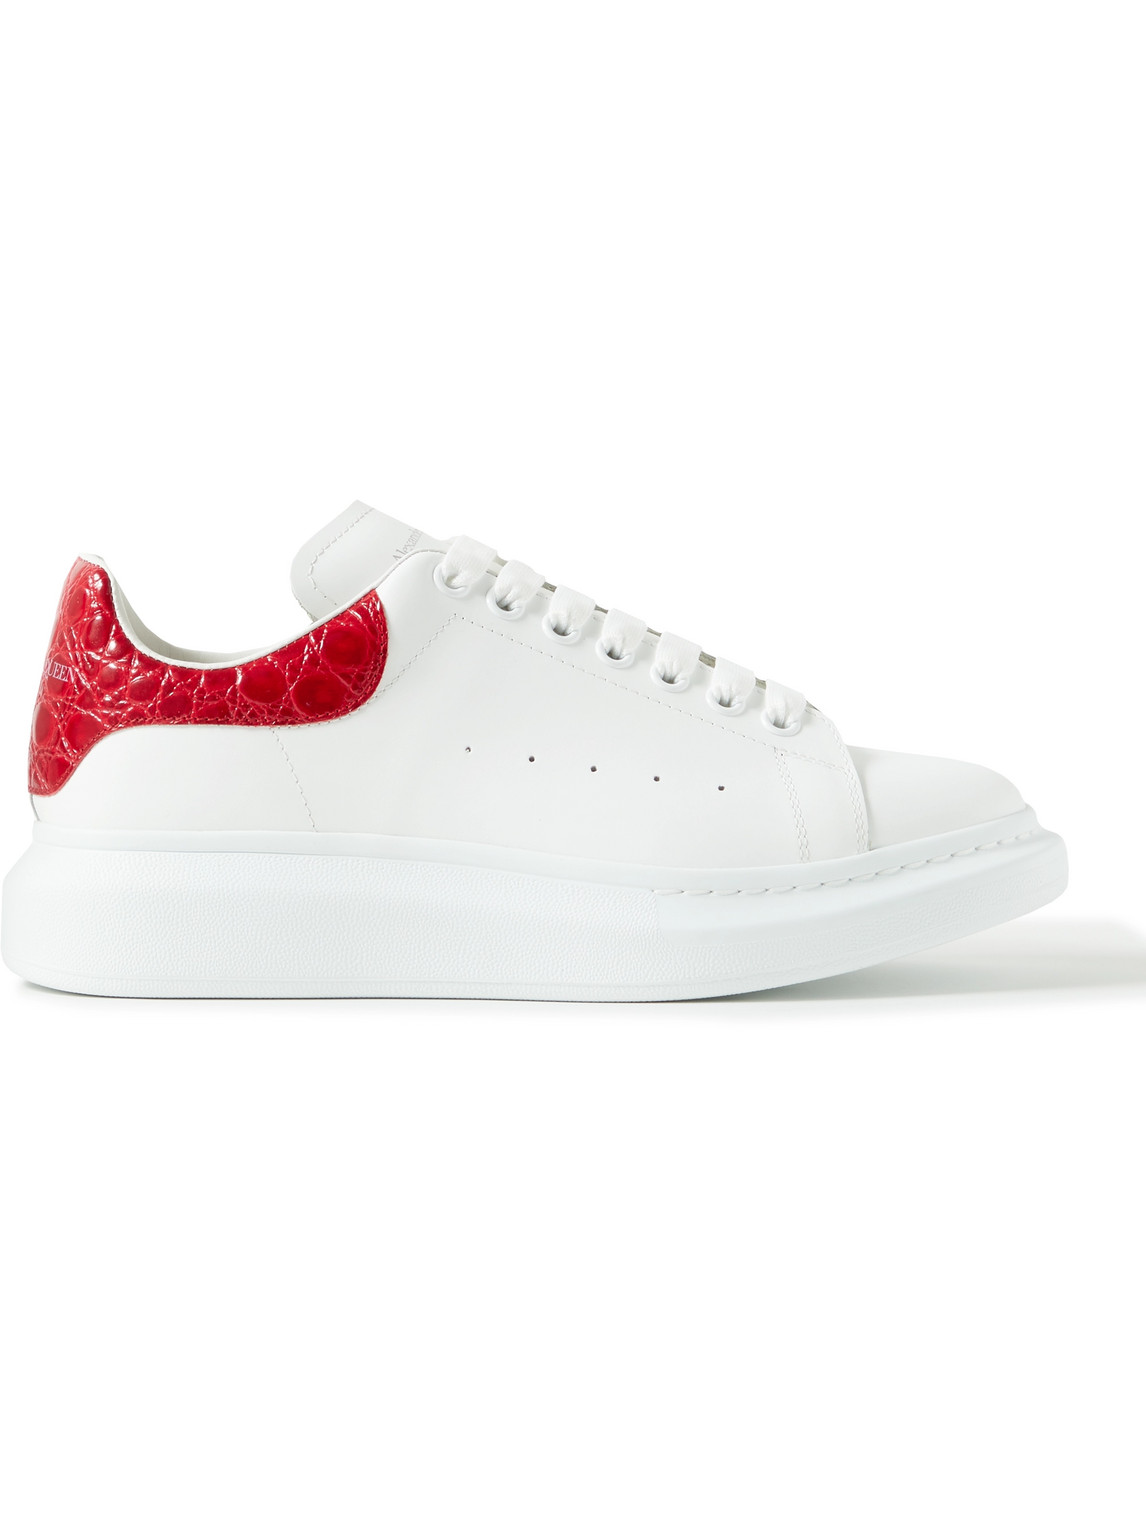 ALEXANDER MCQUEEN EXAGGERATED-SOLE CROC-EFFECT TRIMMED LEATHER SNEAKERS